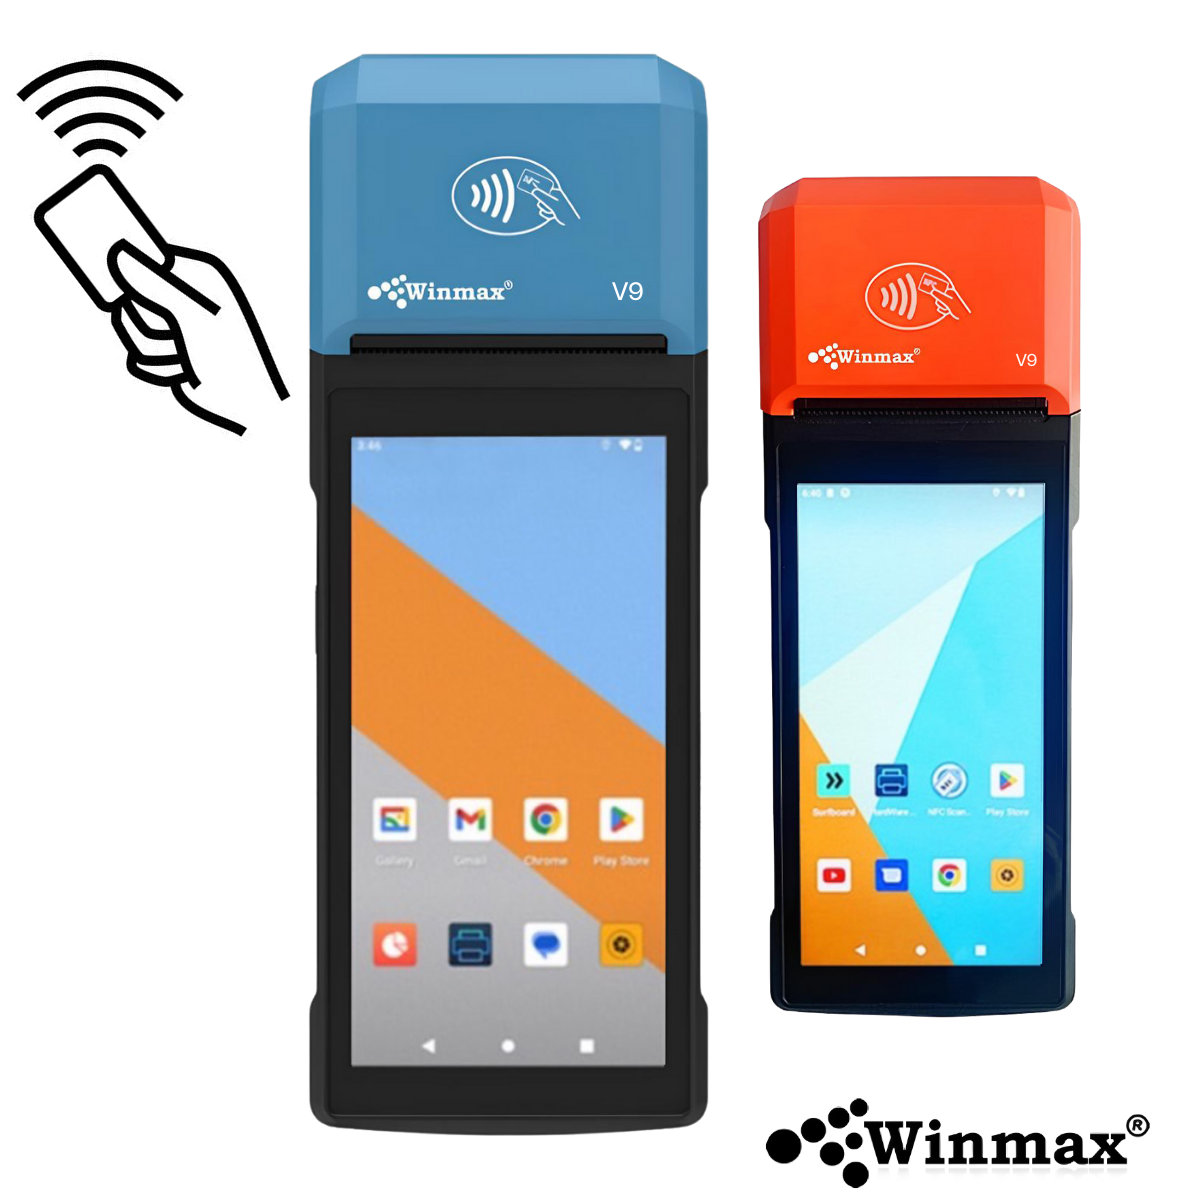 Handheld POS Terminal Android System with Thermal Receipt Printer and NFC Reader Winmax-V9